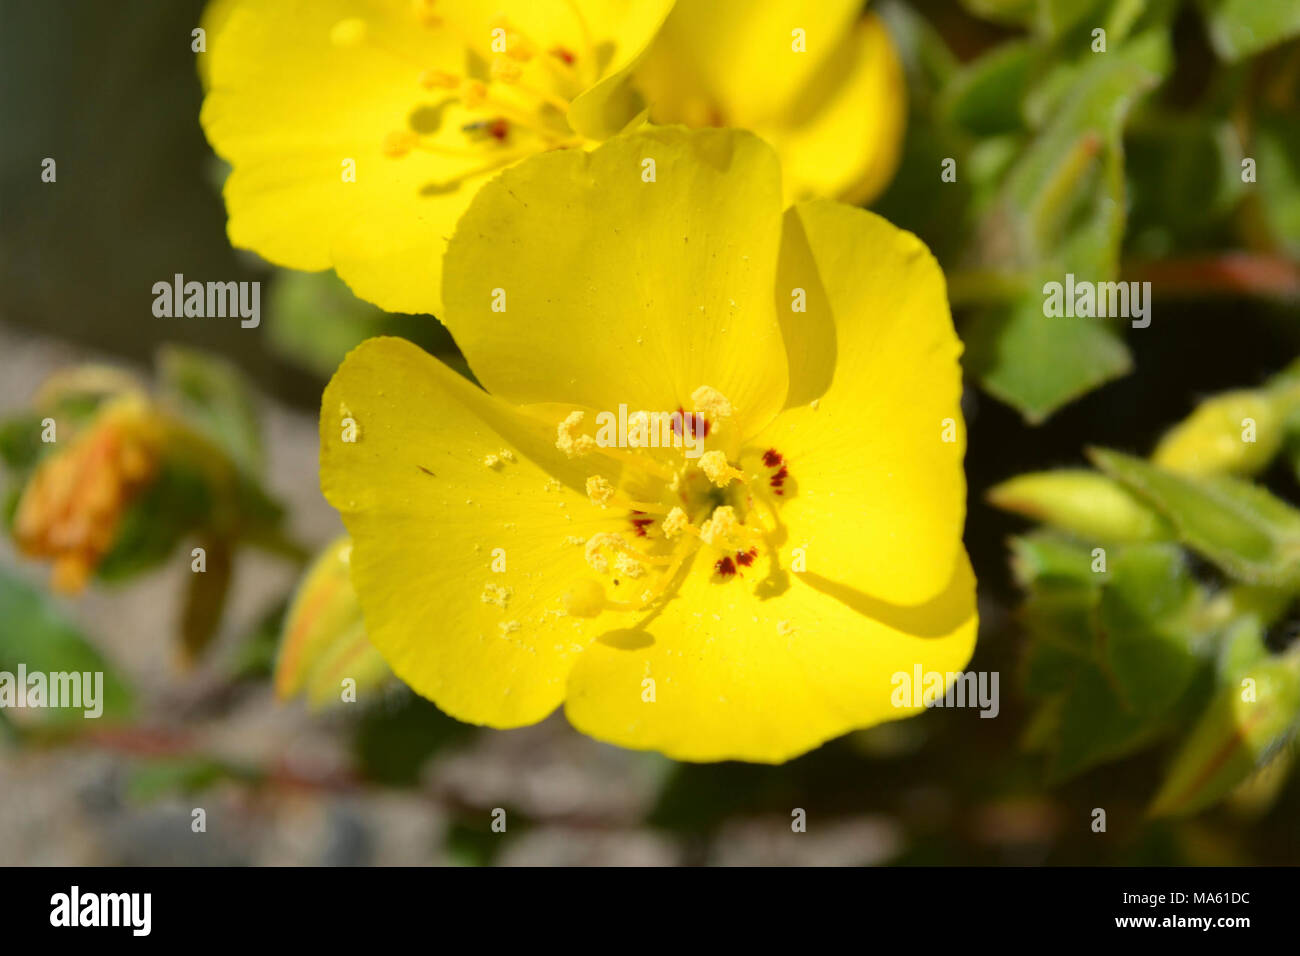 Beach evening primrose (Camissonia cheiranthifolia). A native dune species, this gorgeous yellow flower blooms from April to August. Stock Photo